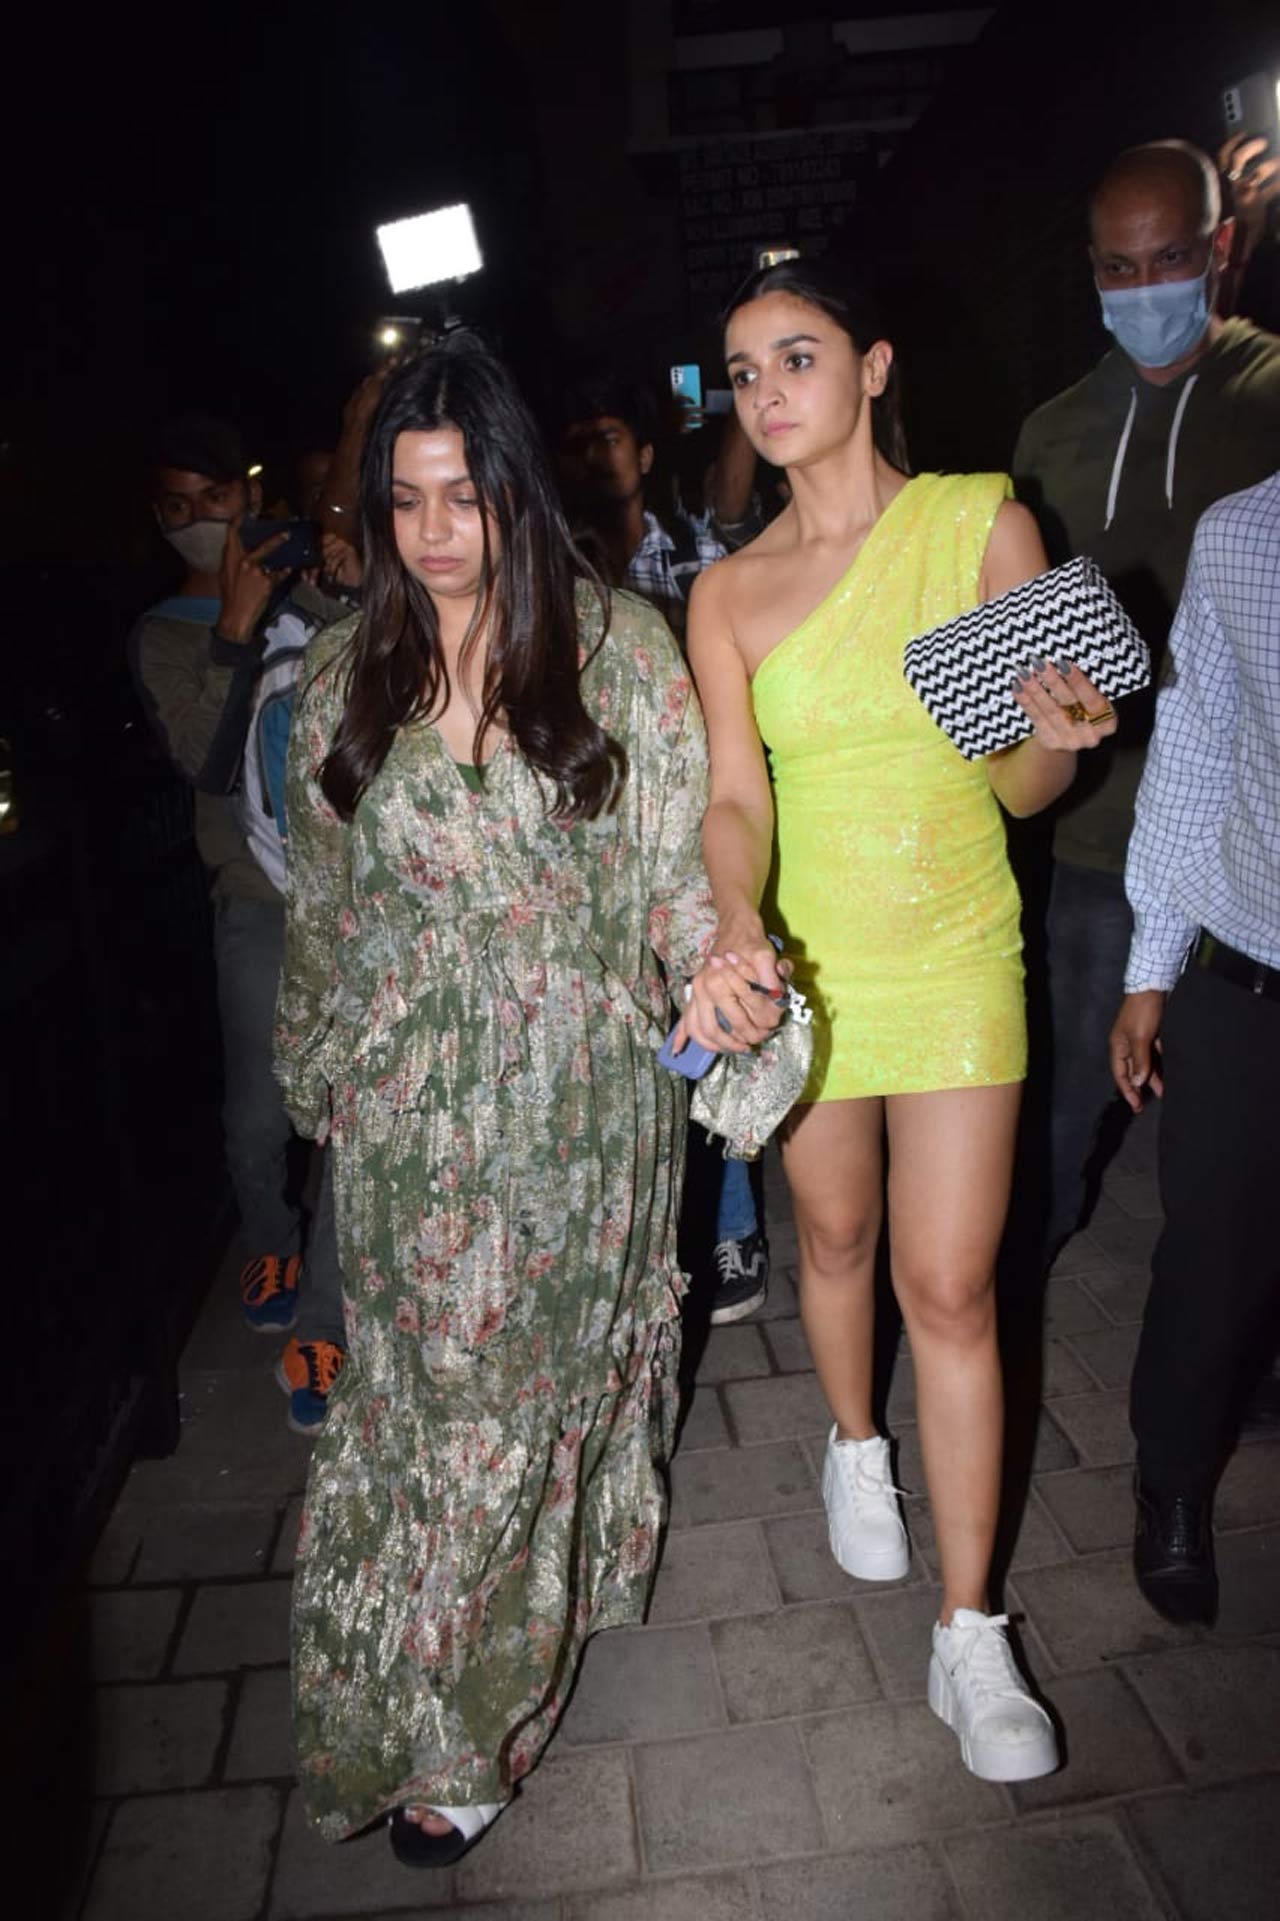 Shaheen Bhatt and Alia Bhatt walked at the dinner party together. Alia was seen wearing a pretty yellow glitter outfit, which she paired with white sneakers. Earlier, for her shoot at the Film City, was seen wearing pretty white stilettos which she changed with something comfier for the dinner party.